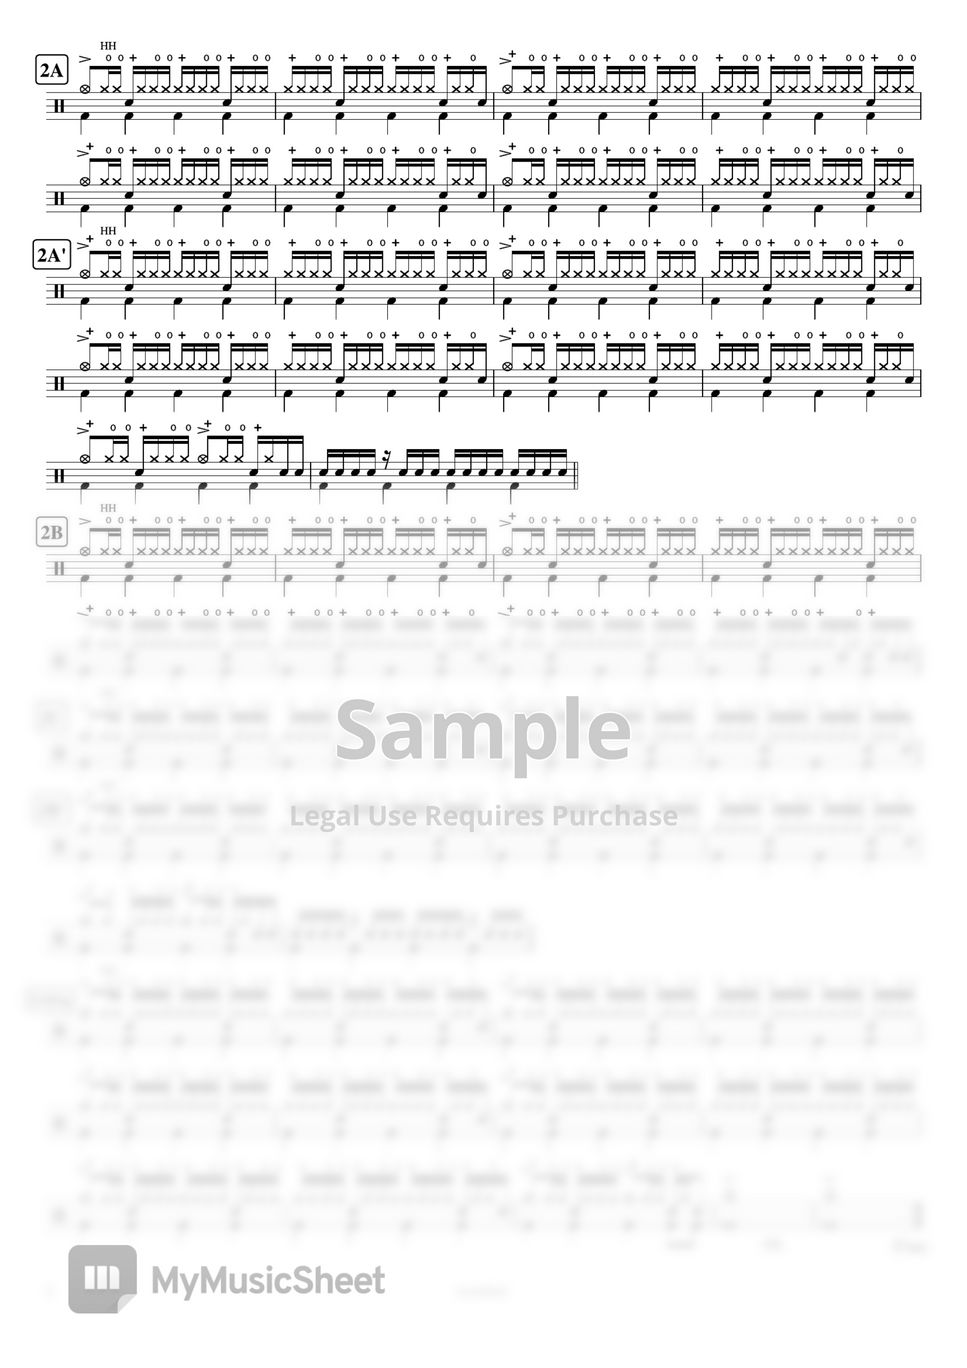 The Cardigans - Lovefool by Cookai's J-pop Drum sheet music!!!